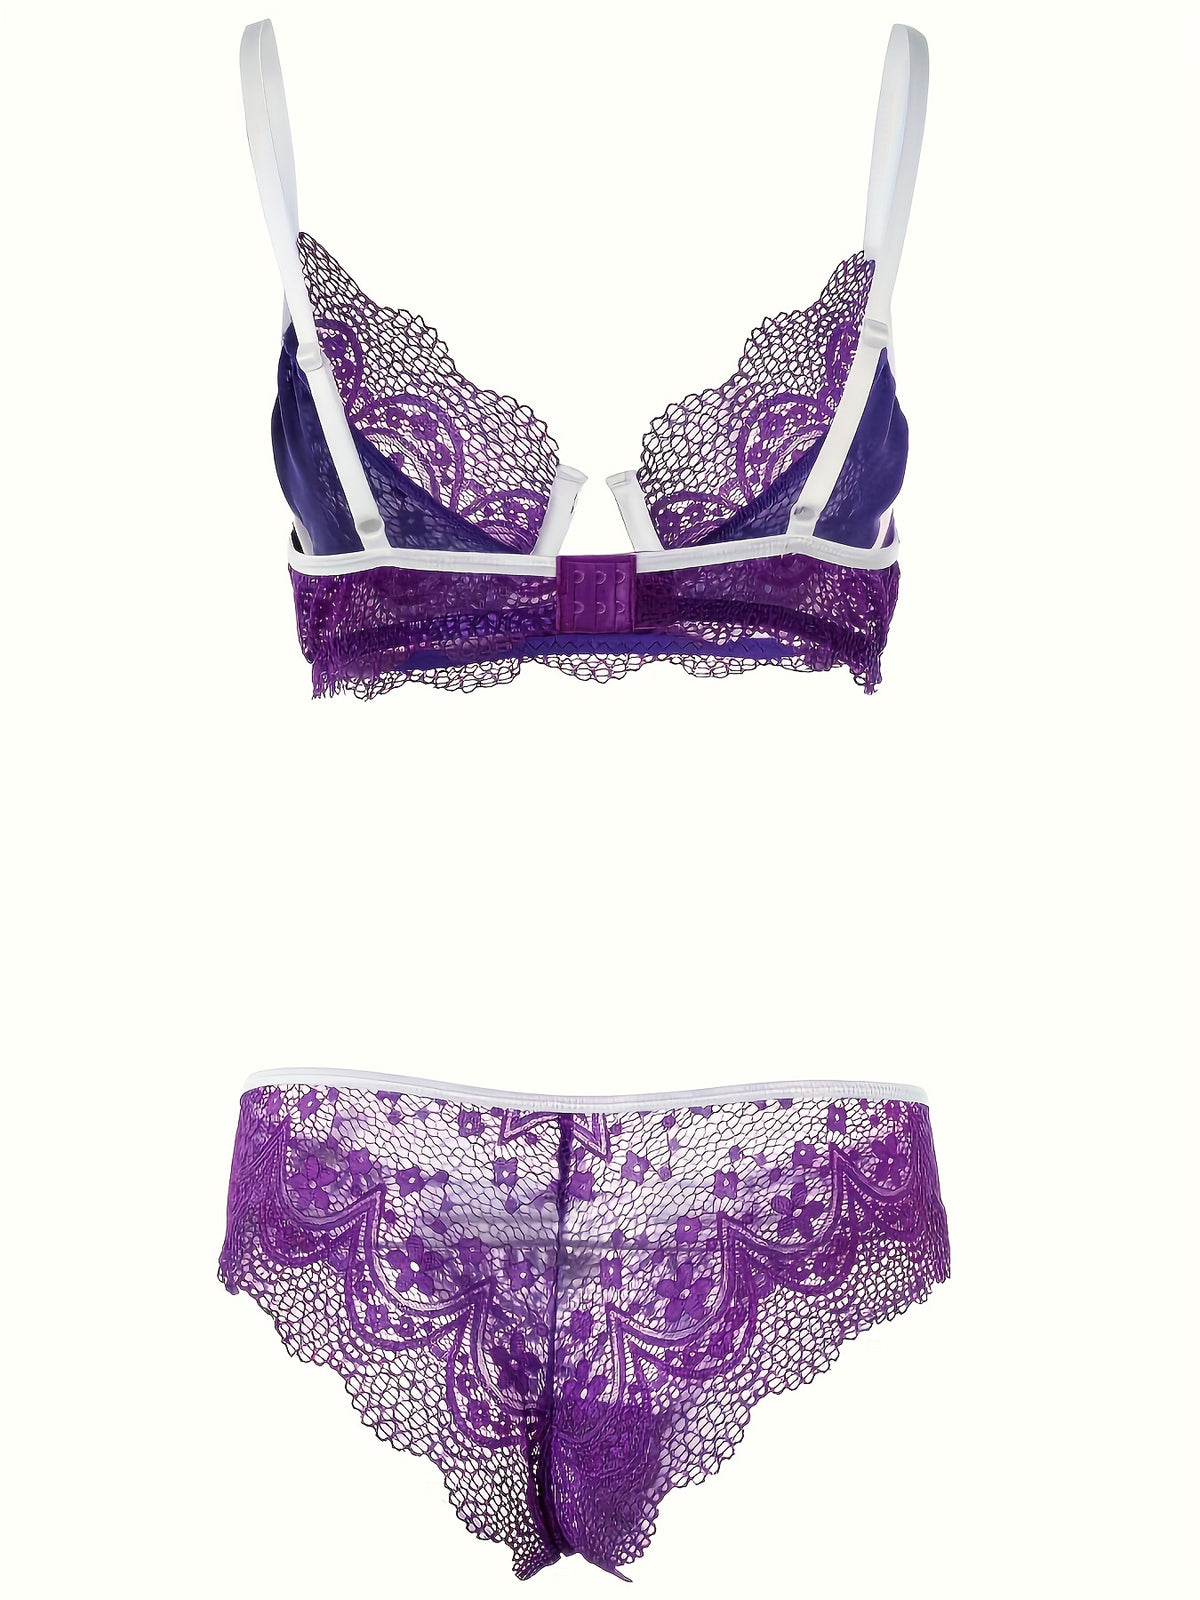 a purple and white bra and panties on a white background